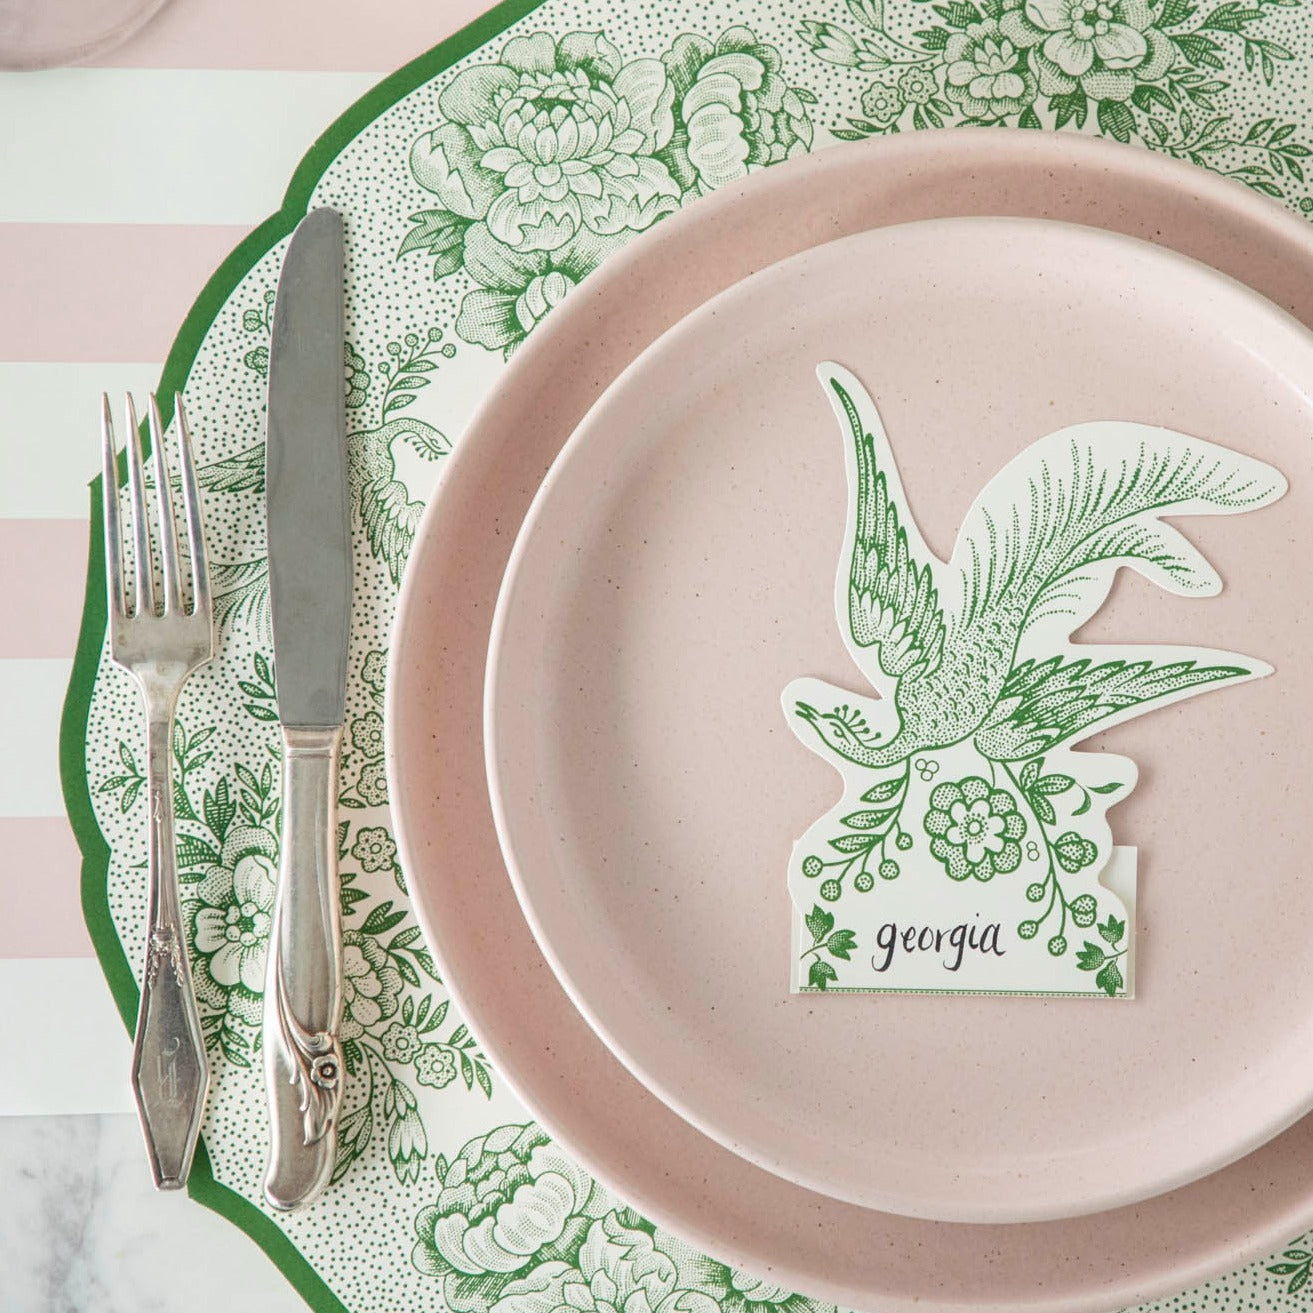 Close-up of the Die-cut Green Asiatic Pheasants Placemat in an elegant place setting, showing the artwork in detail.